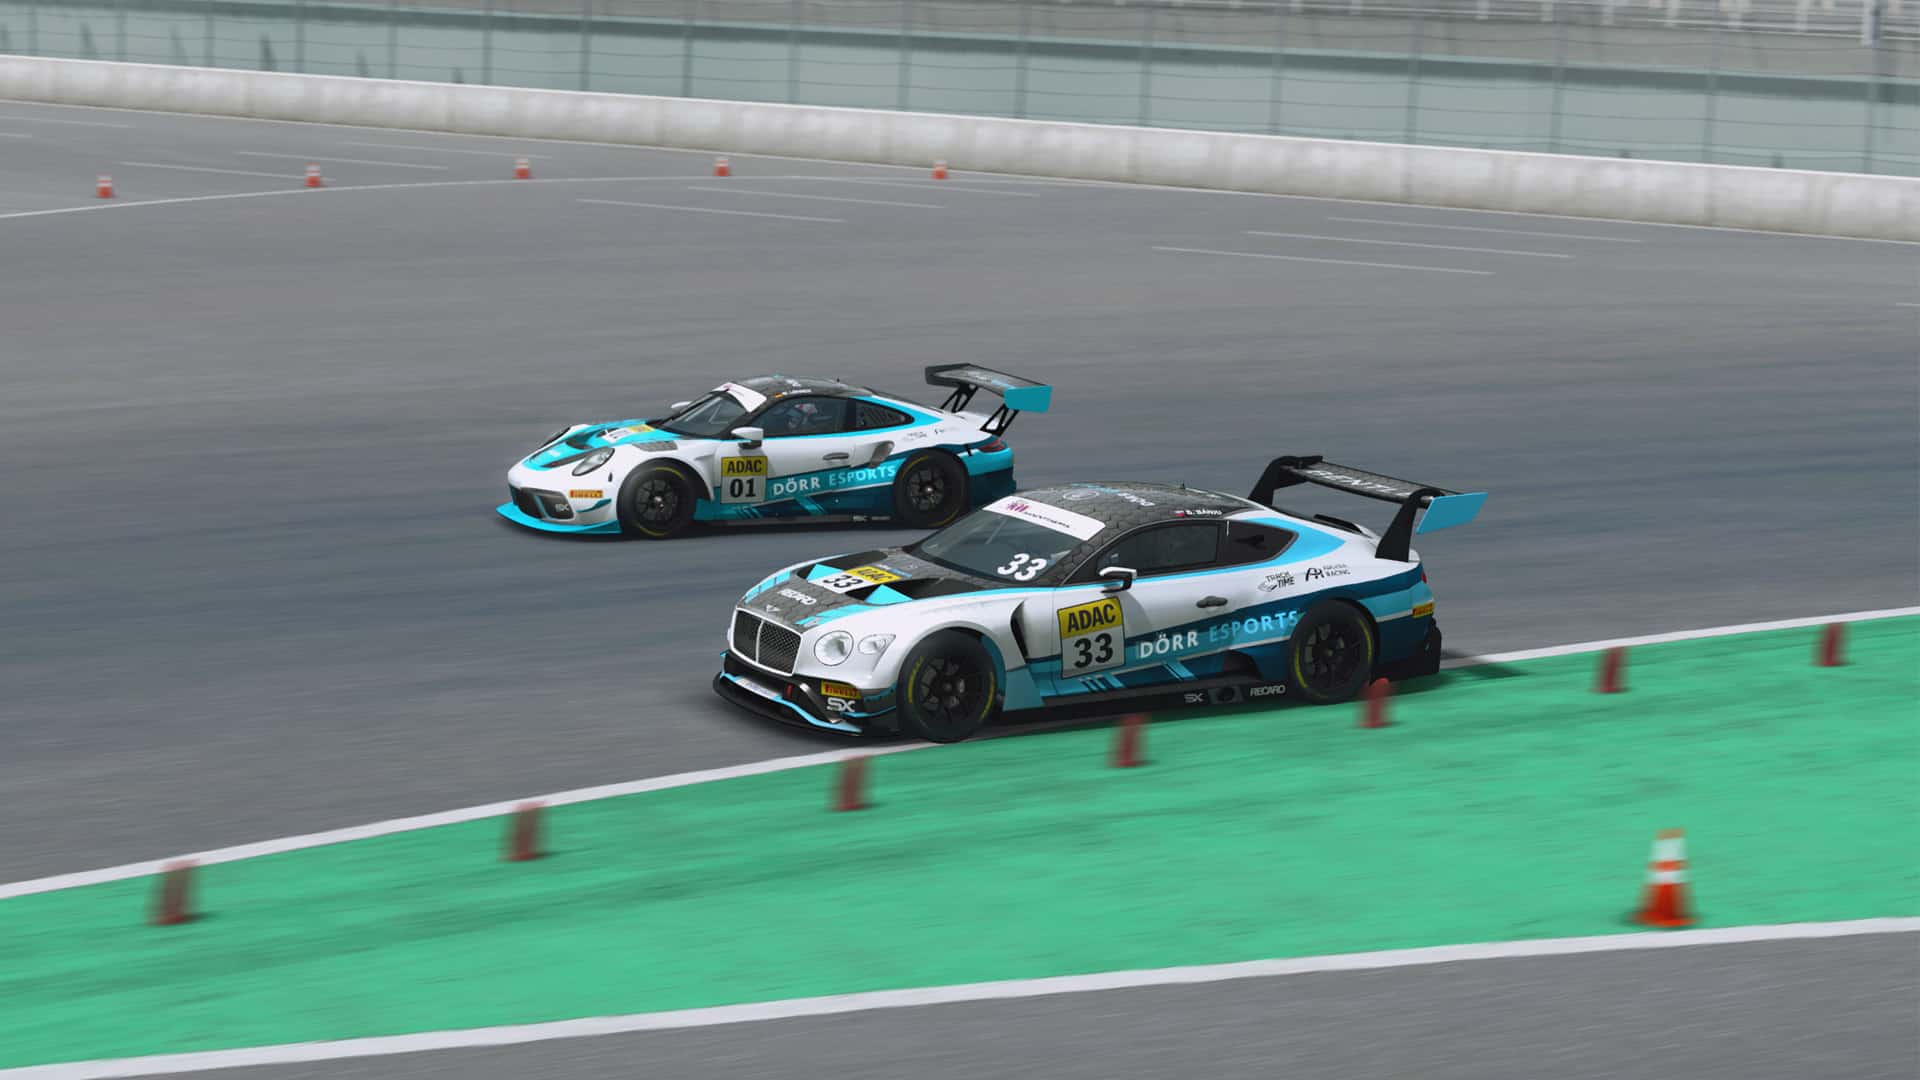 Isaac and Bánki enjoy victories in ADAC GT Masters Esports Championship